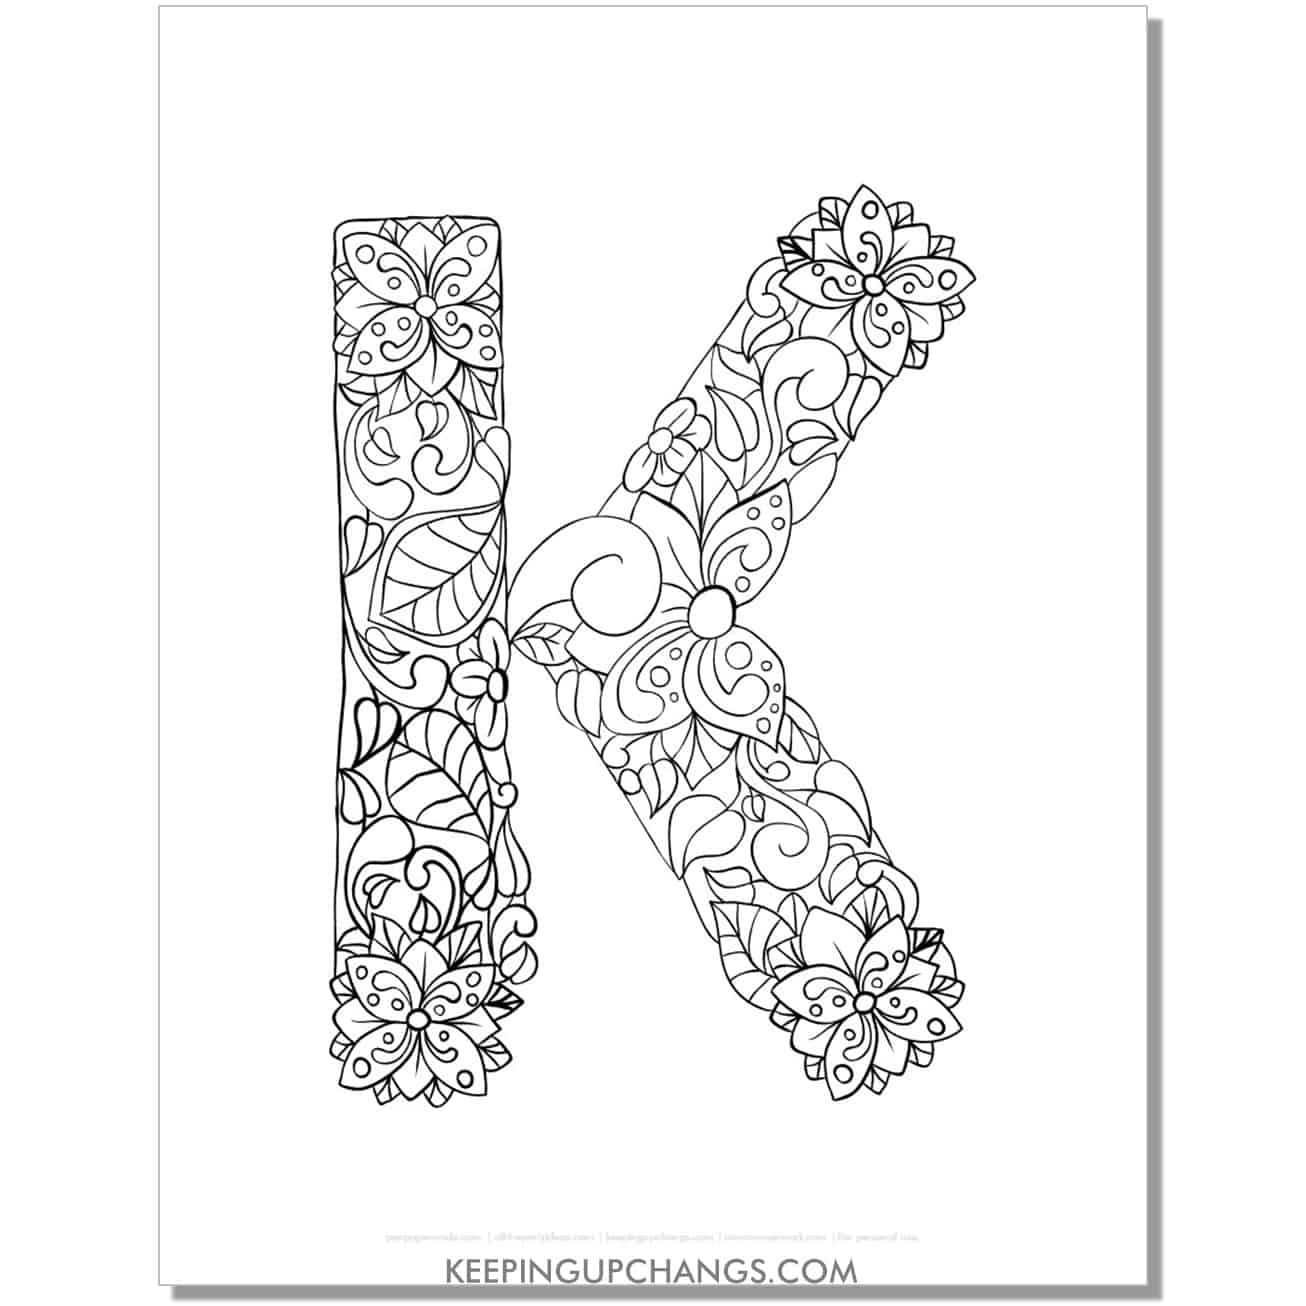 free abc k to color, complicated mandala zentangle for adults.